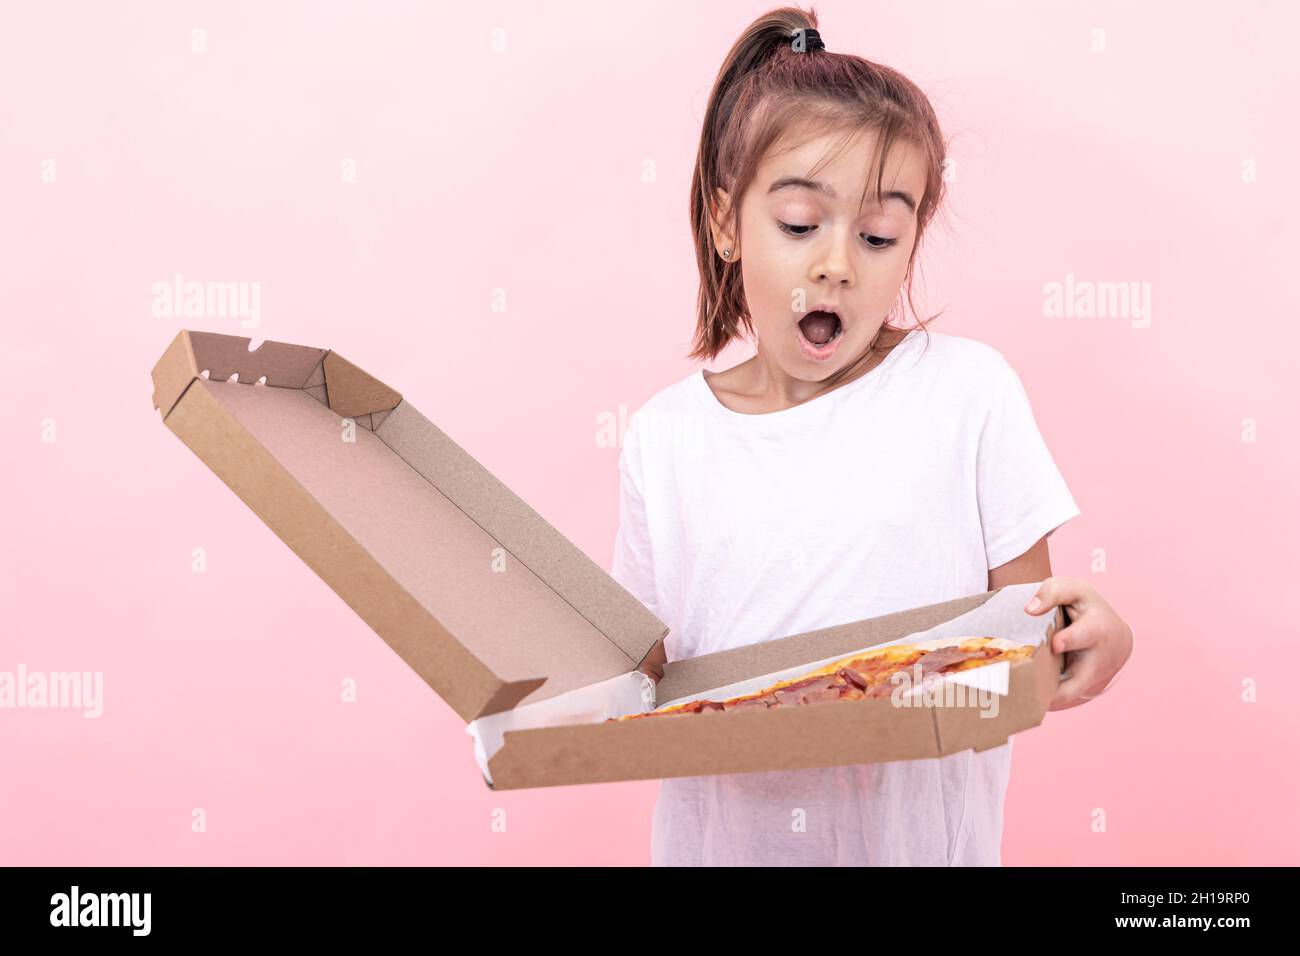 Funny little girl with pizza in a box on a pink background. Stock Photo